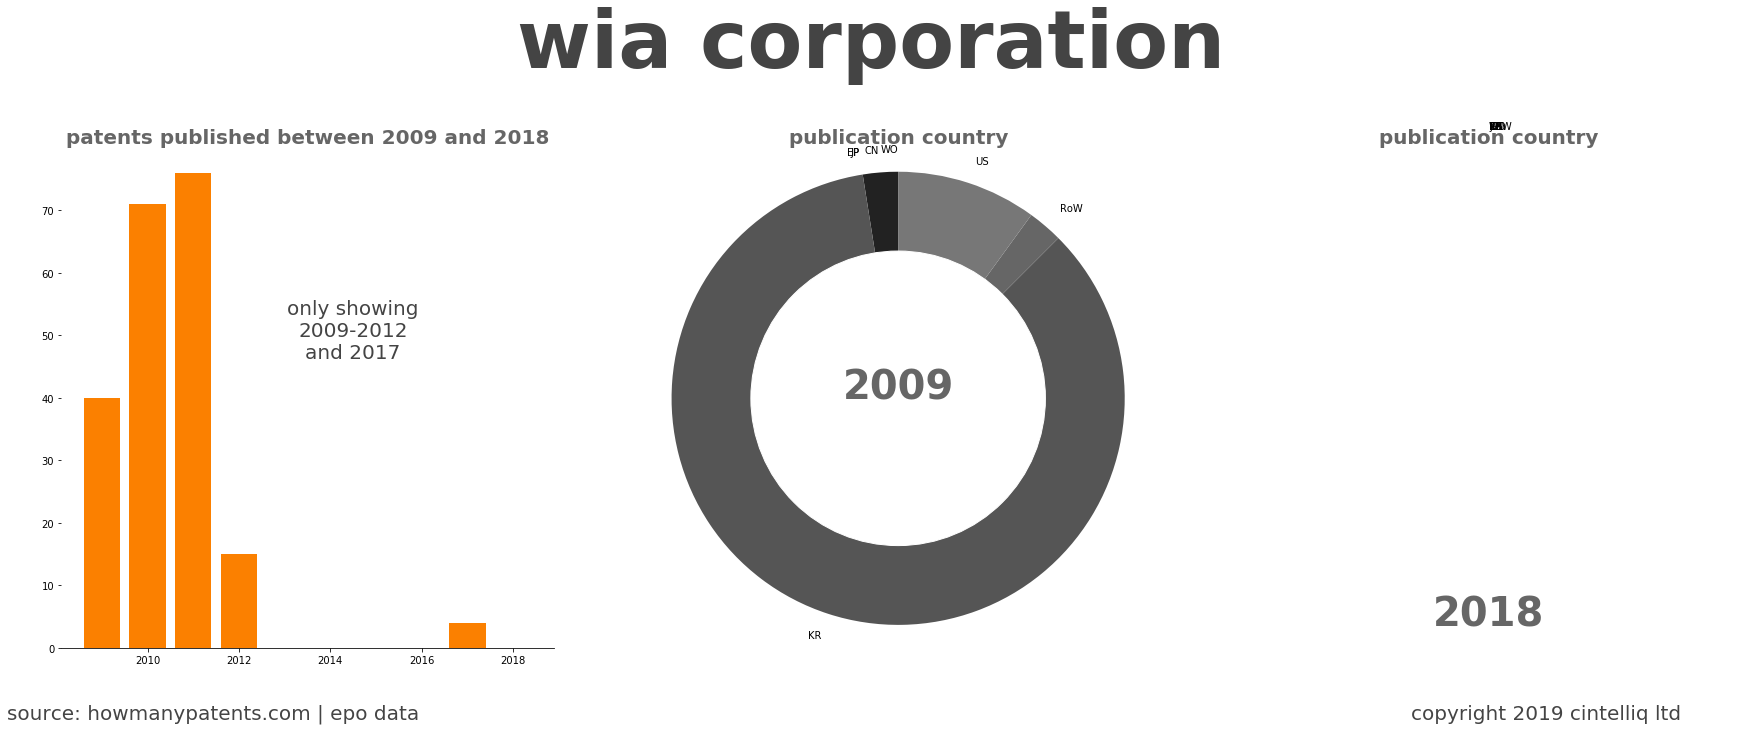 summary of patents for Wia Corporation